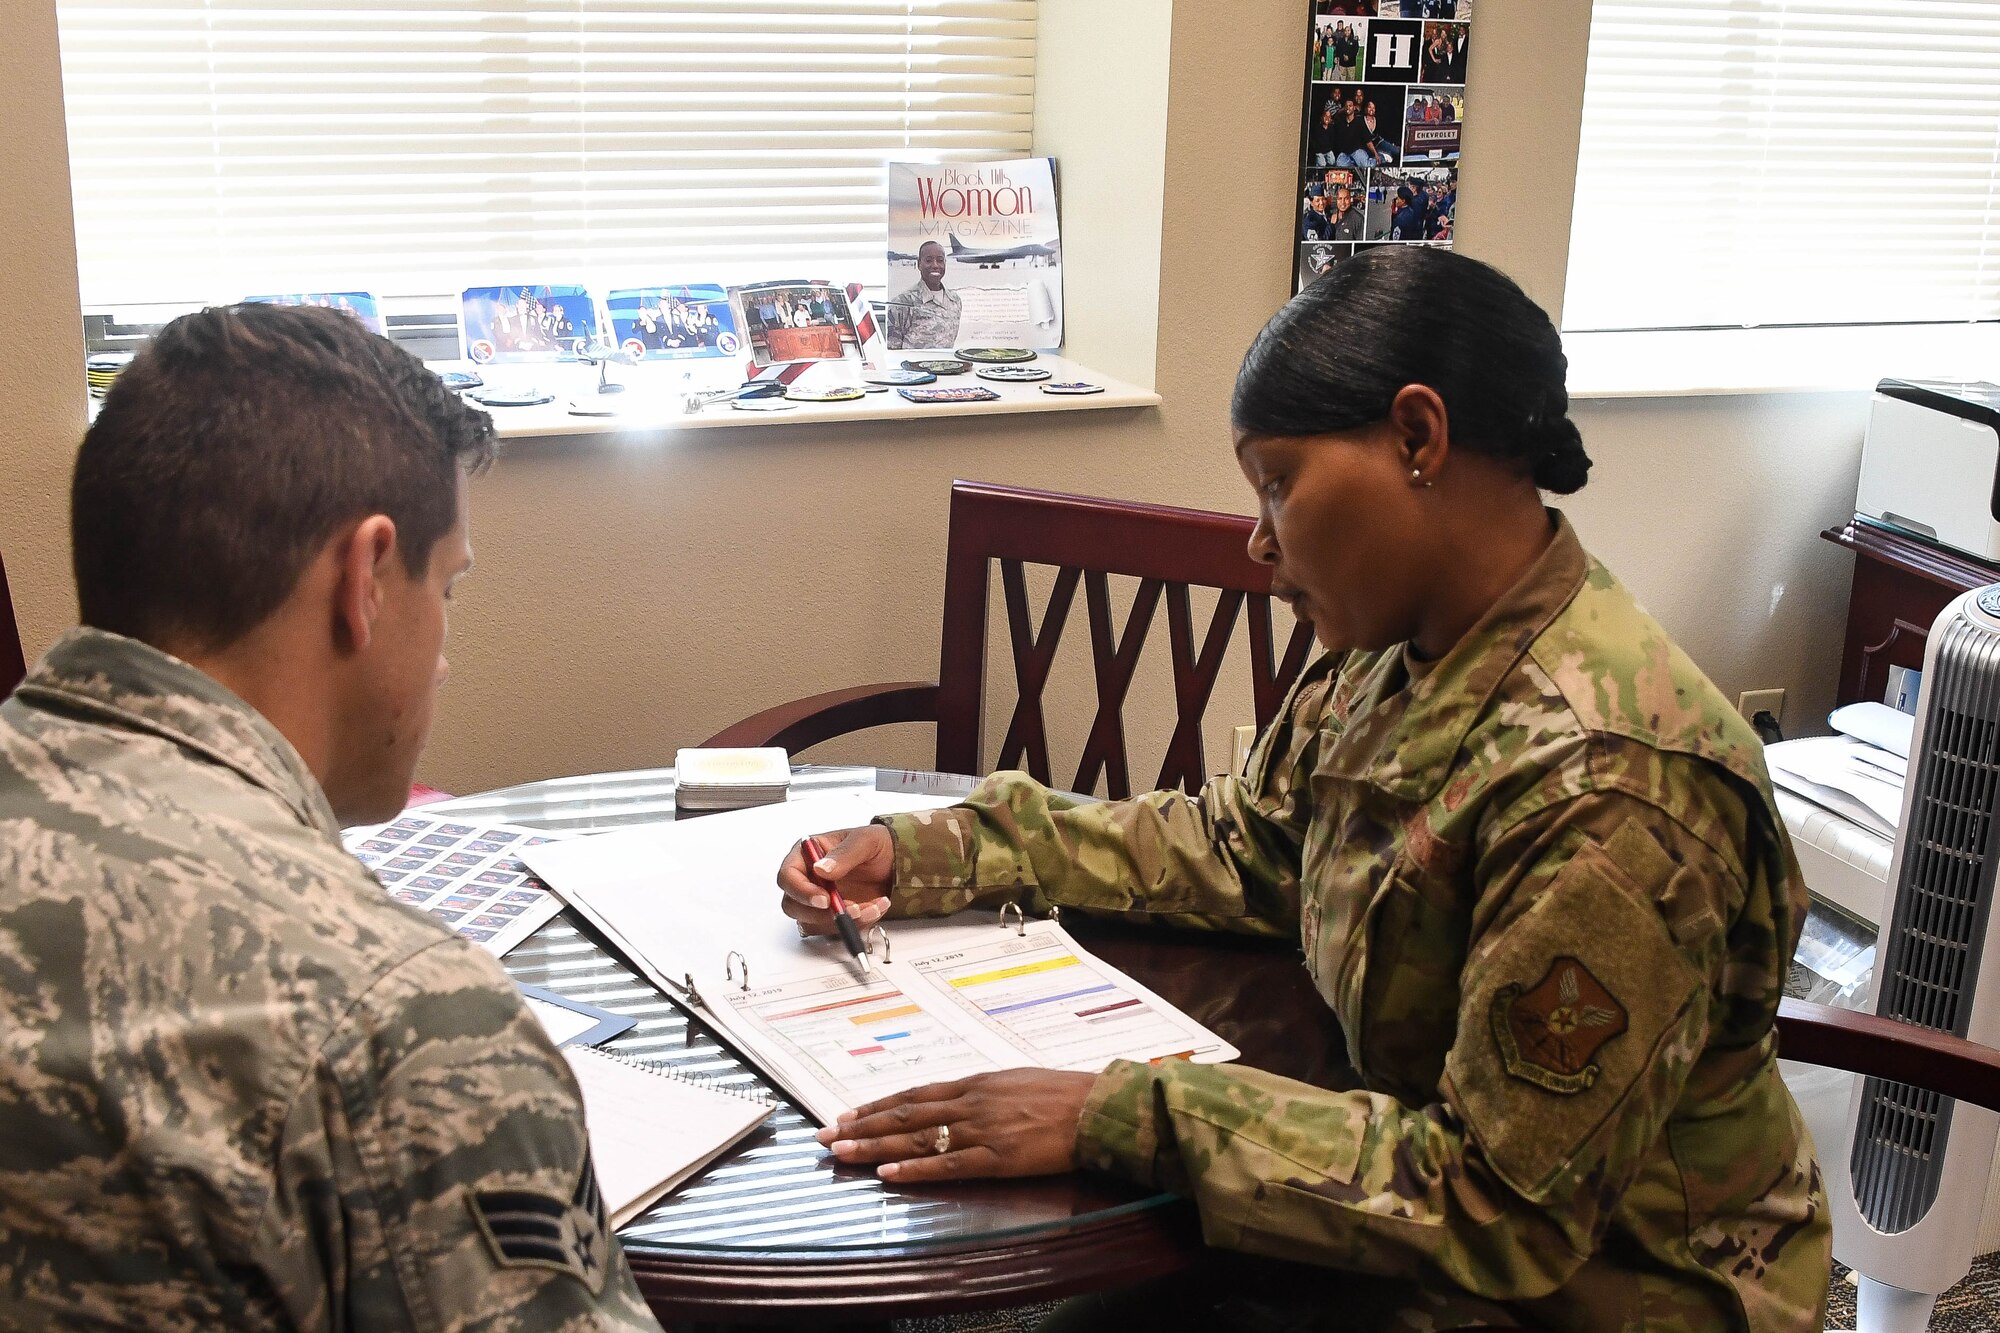 Senior Airman Luke Hill, 8th Air Force and J-GSOC public affairs specialist participates in the Airpower Leadership Academy while shadowing Chief Master Sgt. Melvina Smith, 8th Air Force and J-GSOC command chief. “Shadow Chief for a Day” is an opportunity designed to give Airmen increased insight into organizational leadership and a broader perspective of units within 8th Air Force. (U.S. Air Force photo by Mr. Justin Oakes)